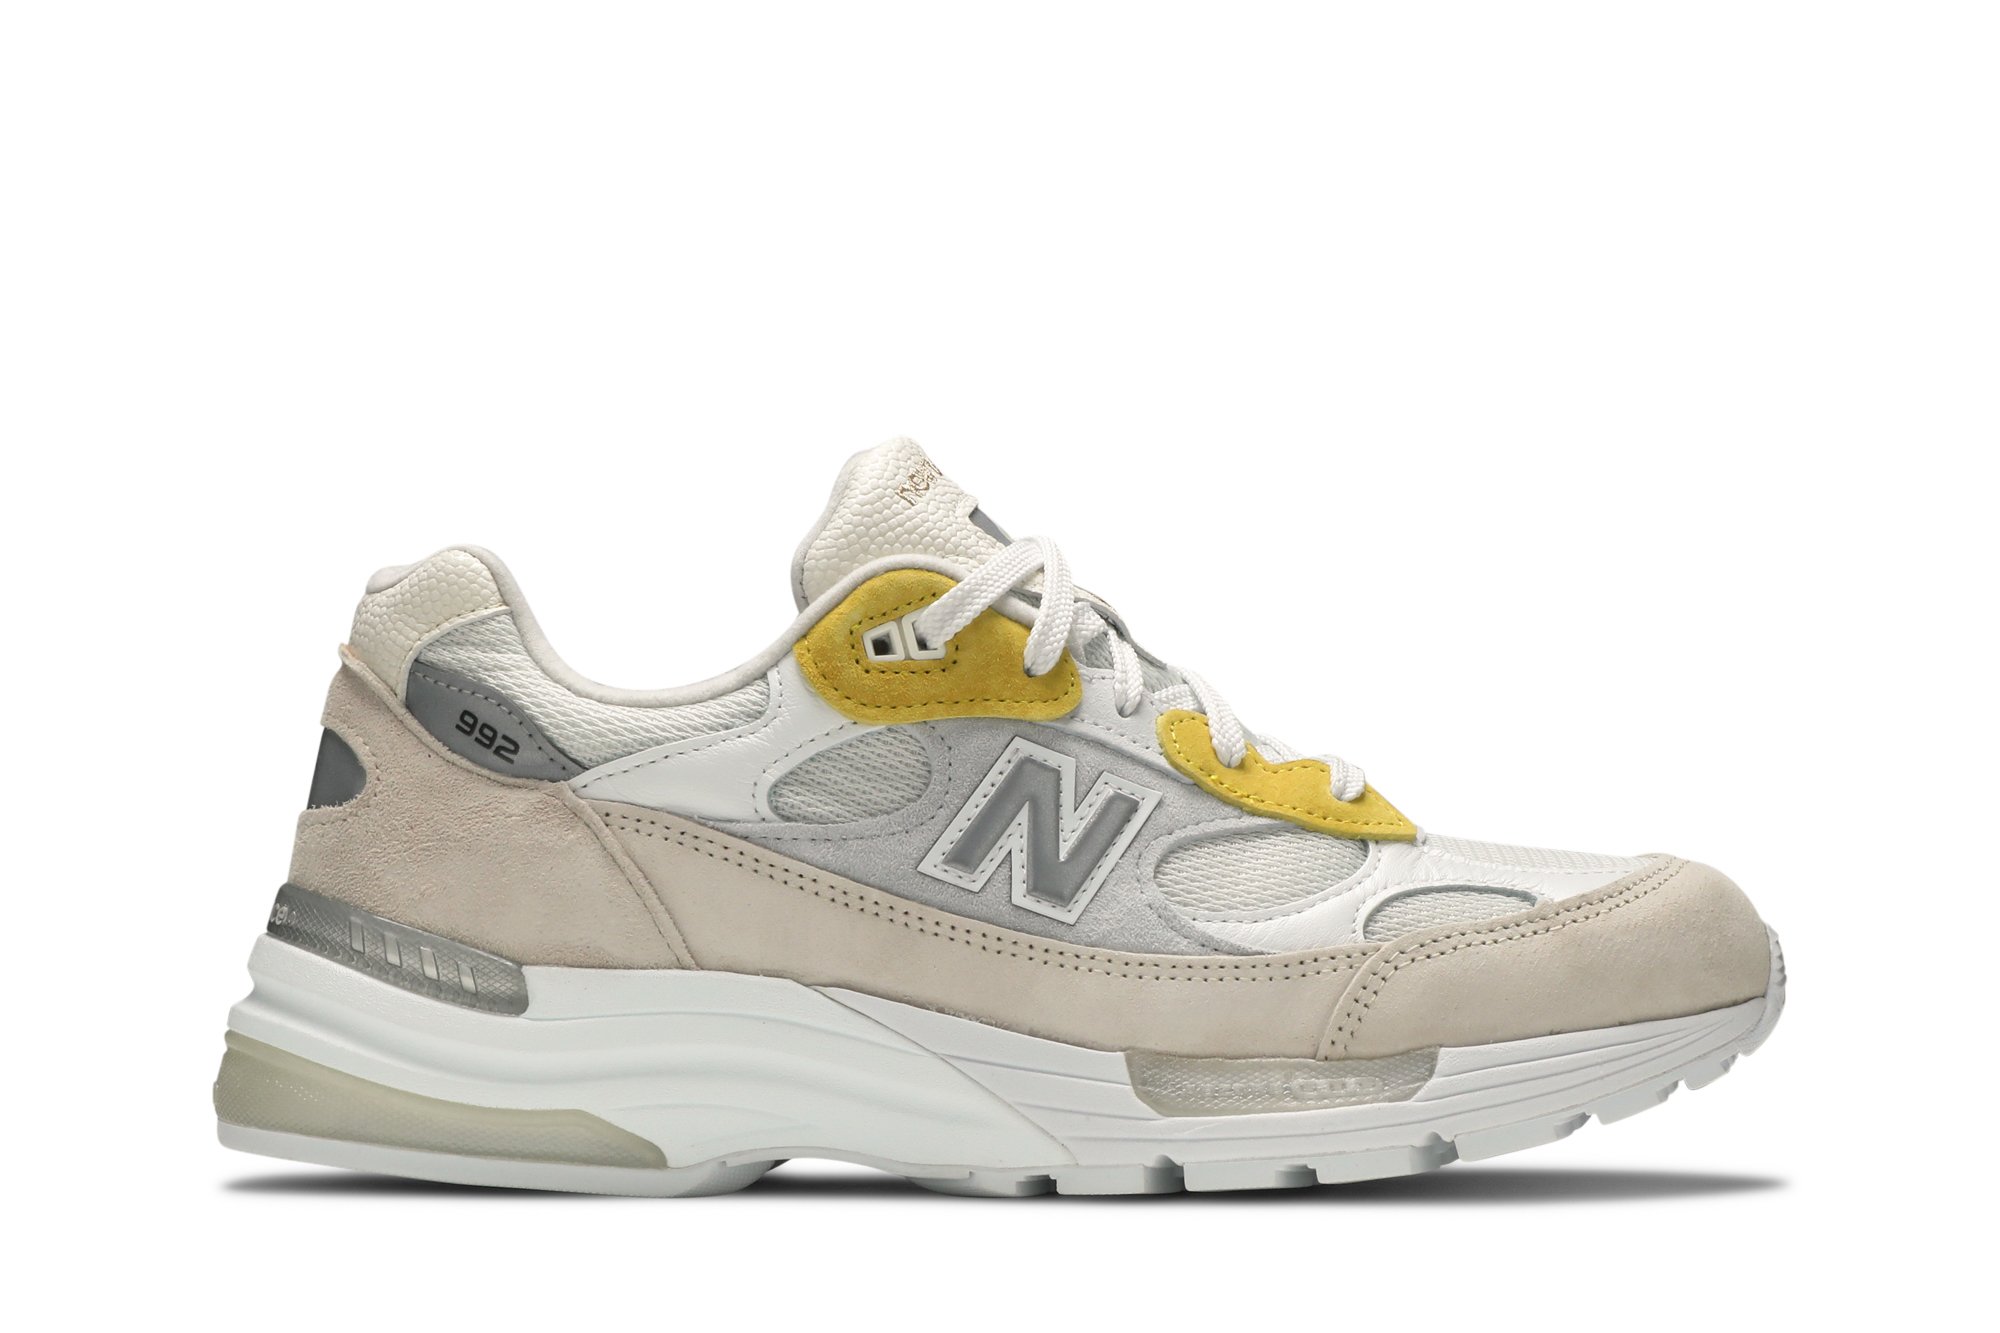 Buy Paperboy Paris x 992 Made in USA 'Fried Egg' - M992PB1 | GOAT